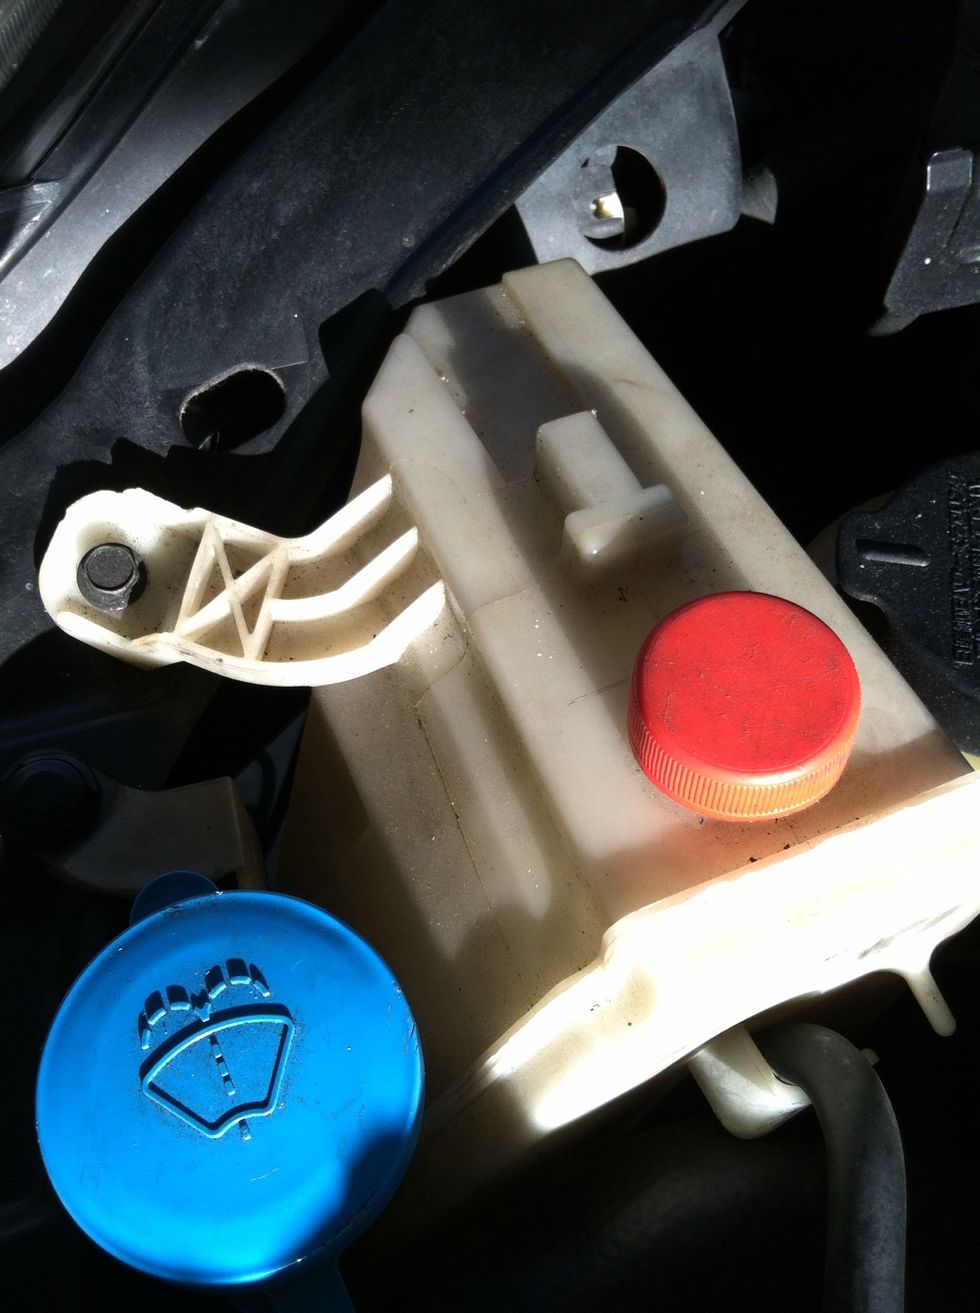 Remove the coolant container from the car.